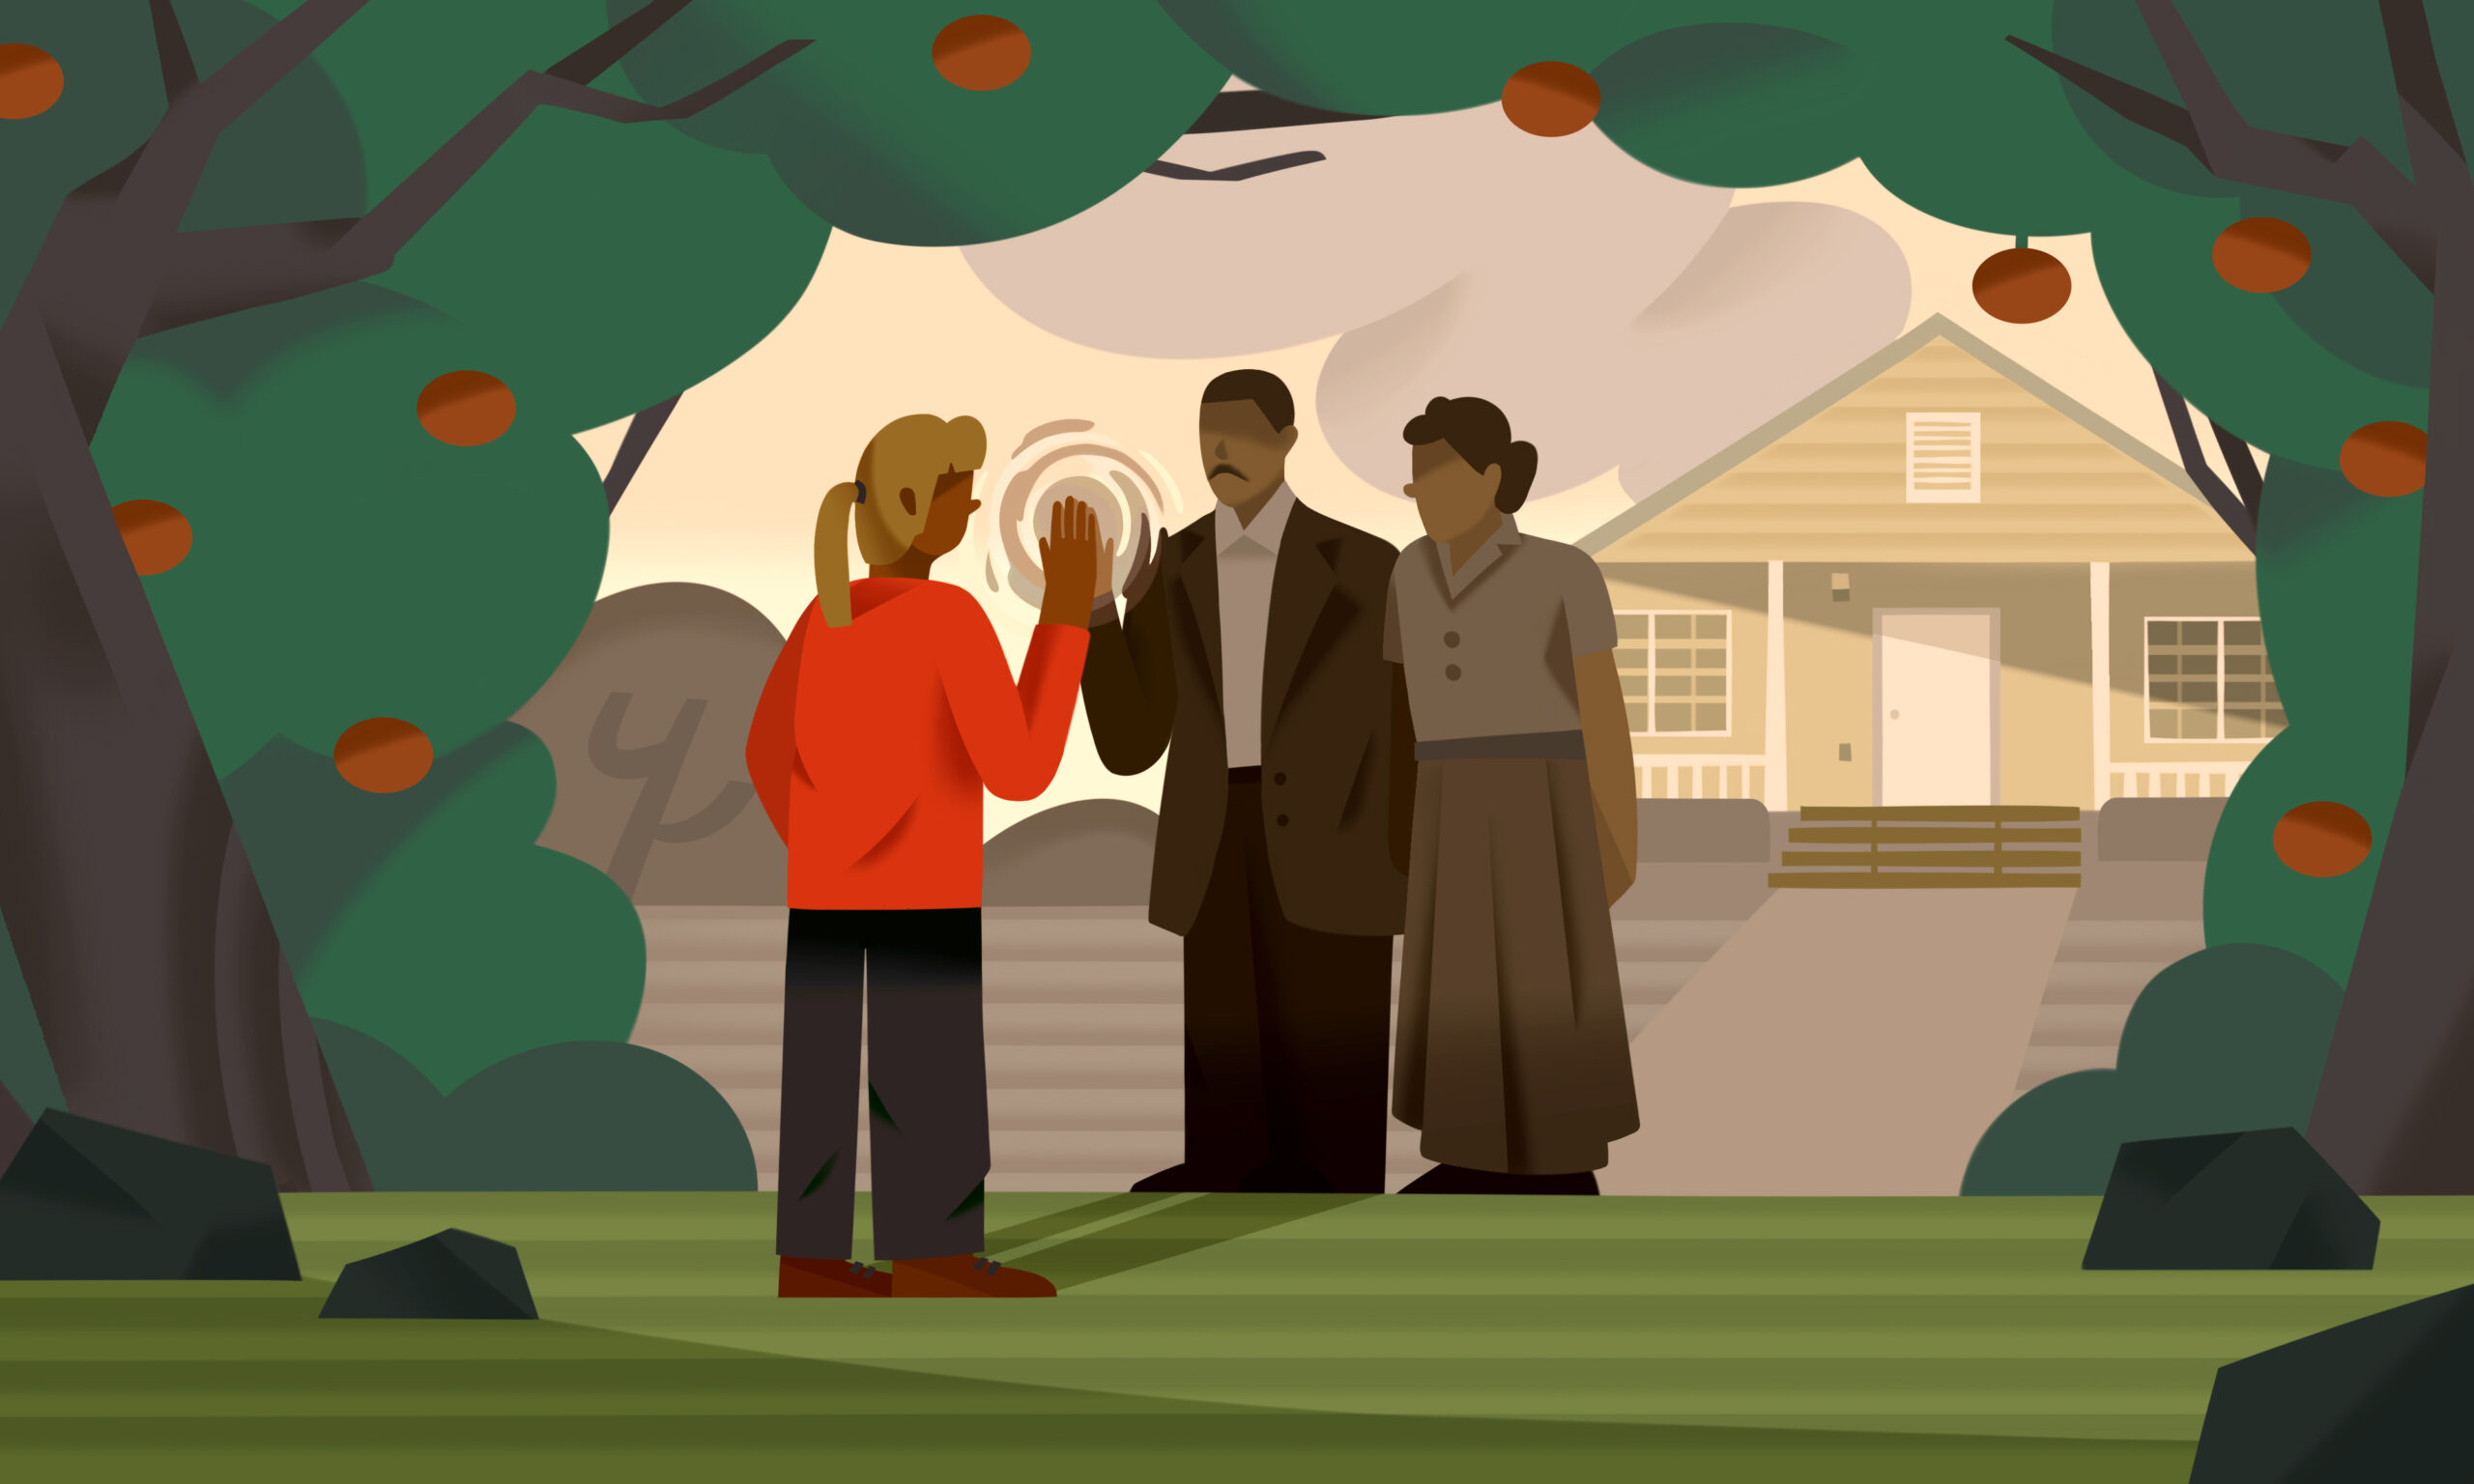 The illustration portrays Sonya Mallard gazing into the historical moments of Harry T. and Harriette Moore, who are shown standing before their home.